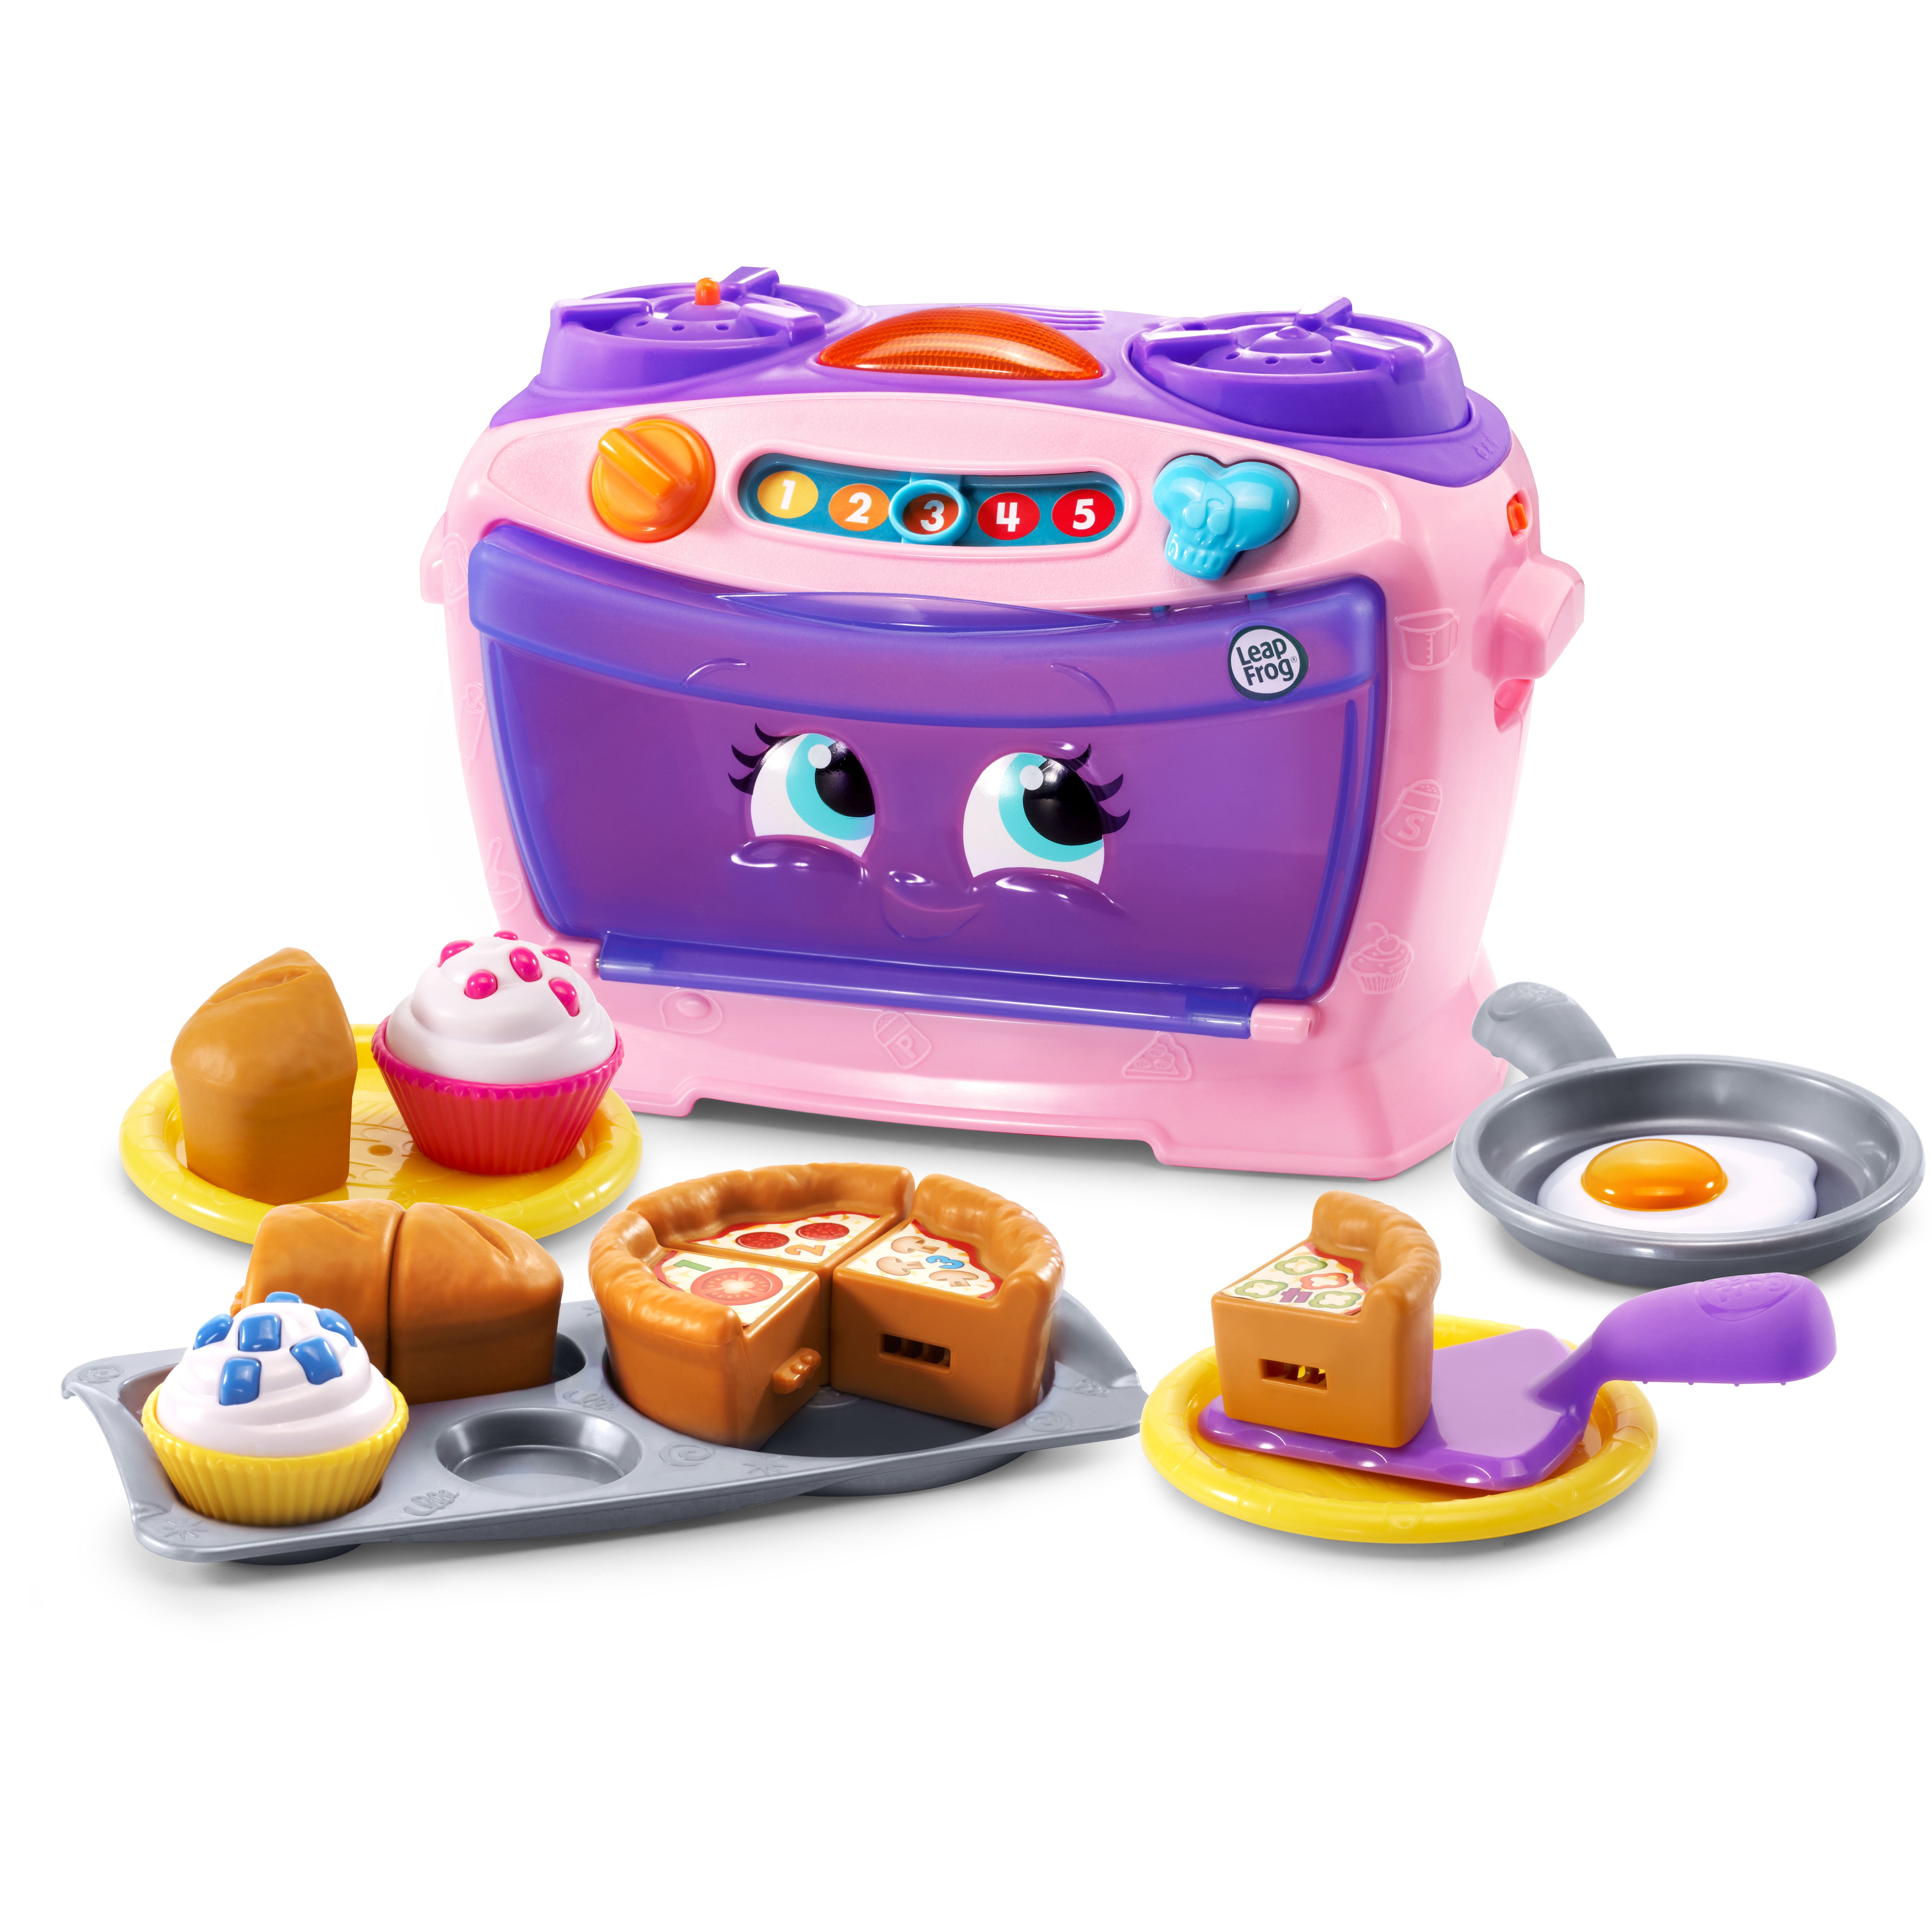 NEW LeapFrog Number Lovin Oven Learning Toy Toddlers KidsFREE SHIPPING 